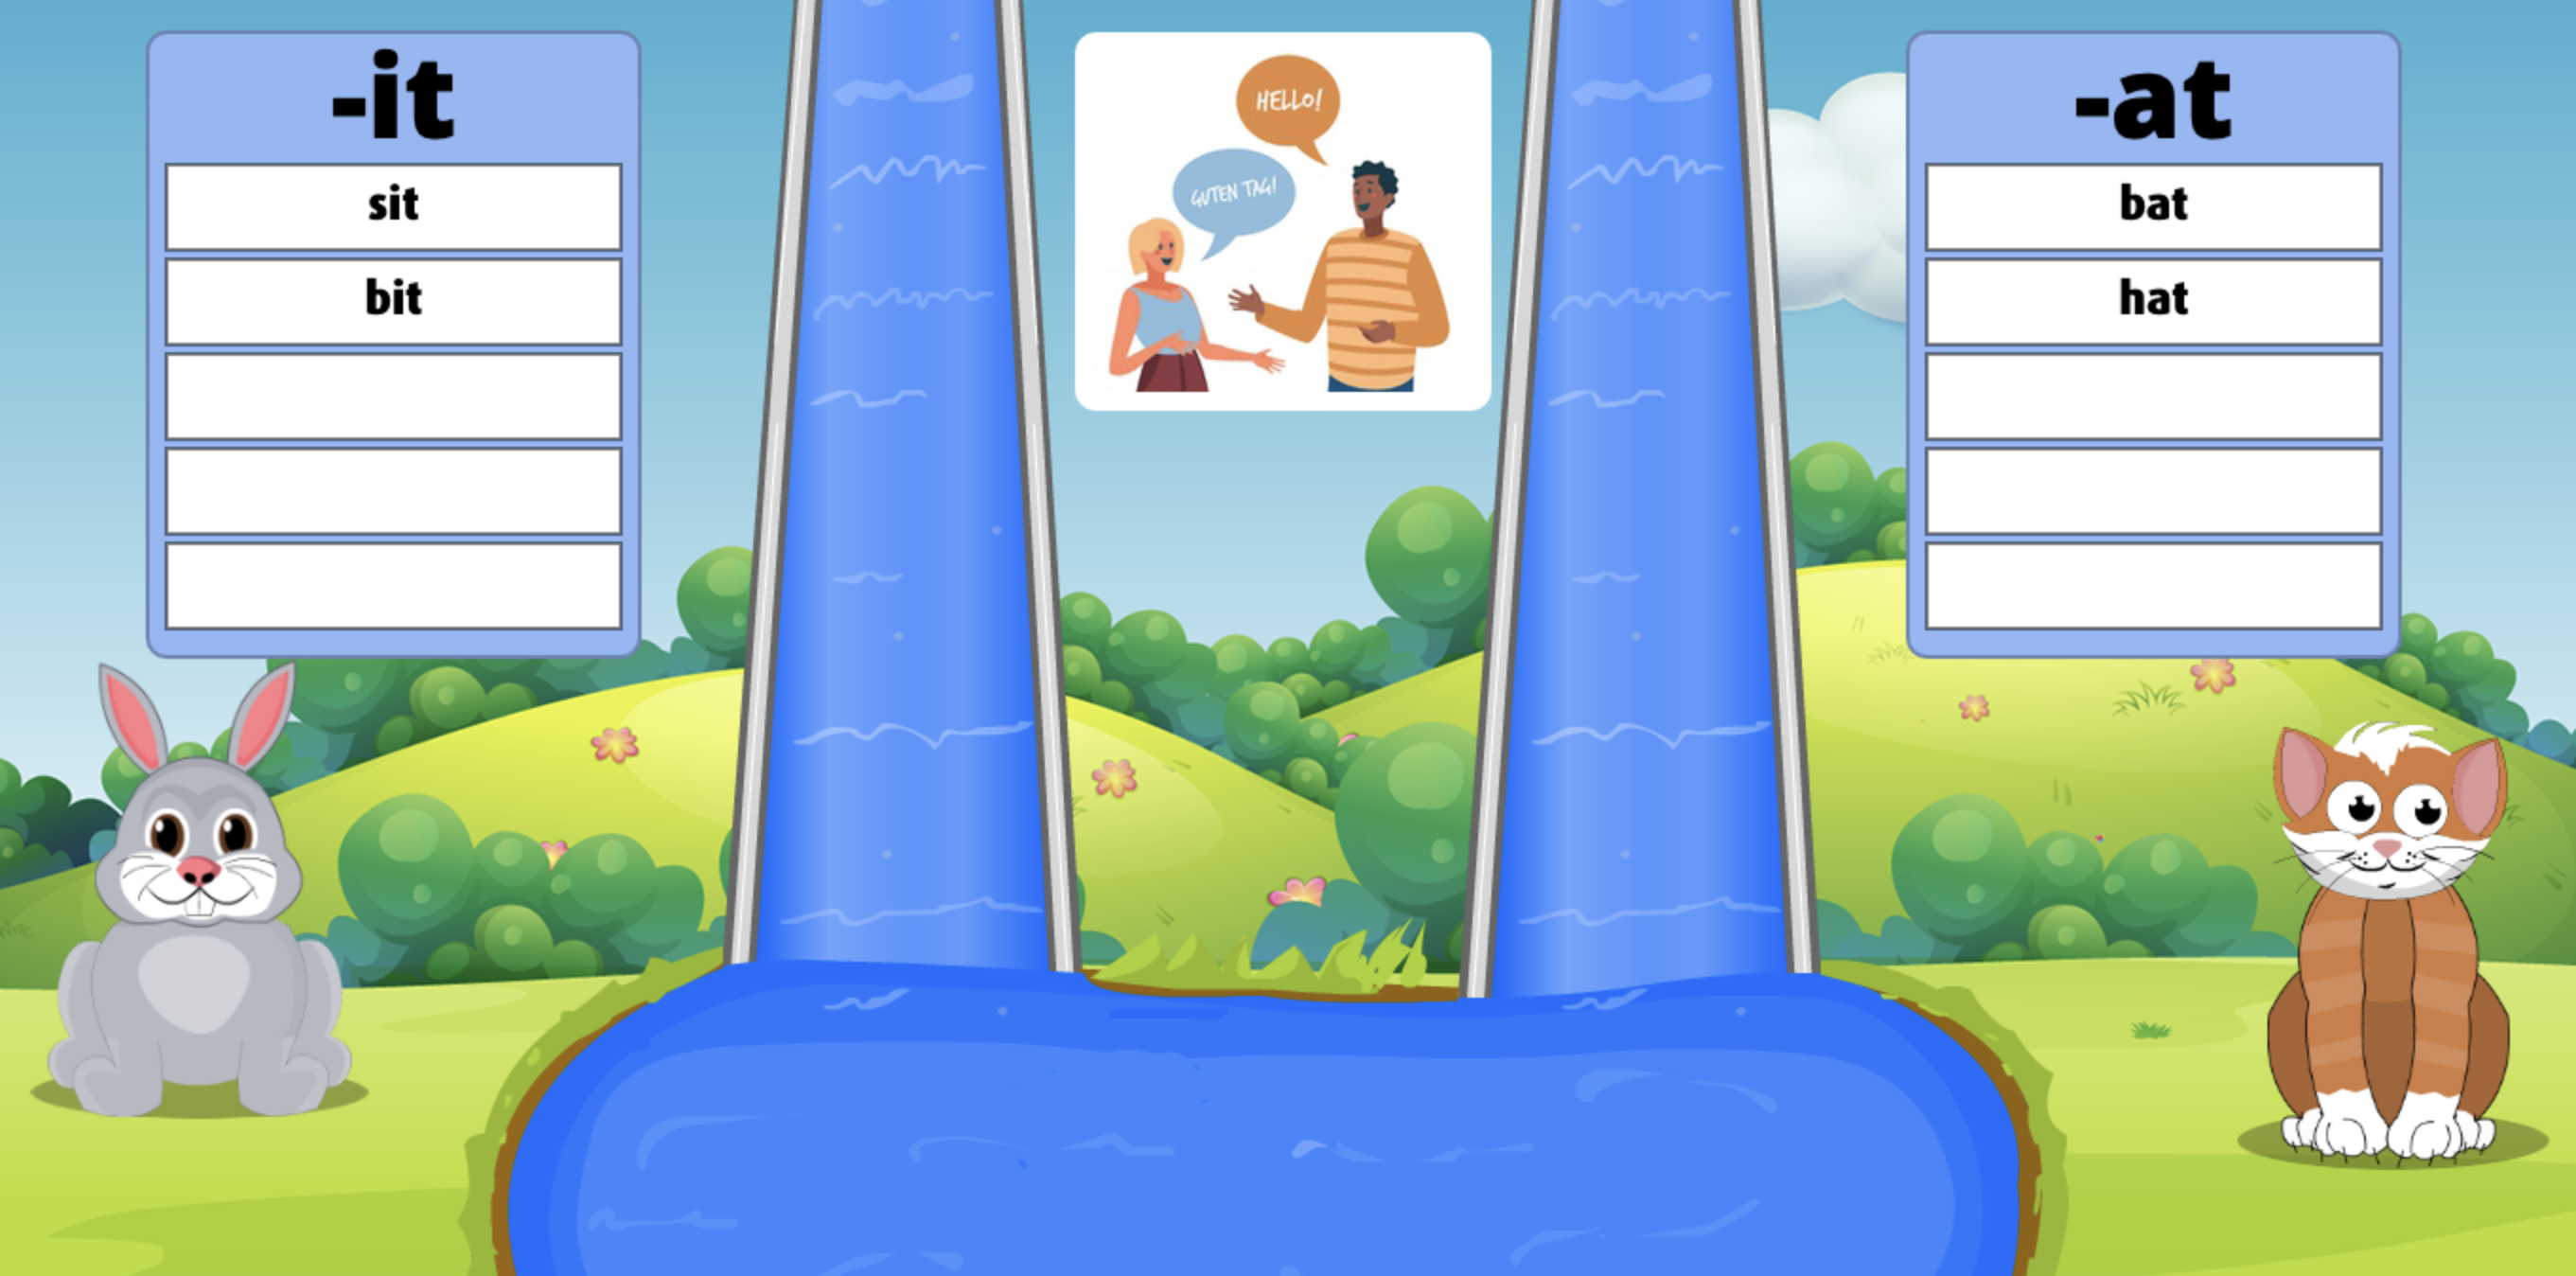 Select which word family chat belongs to to make Rabbit and Cat slide down the water slide